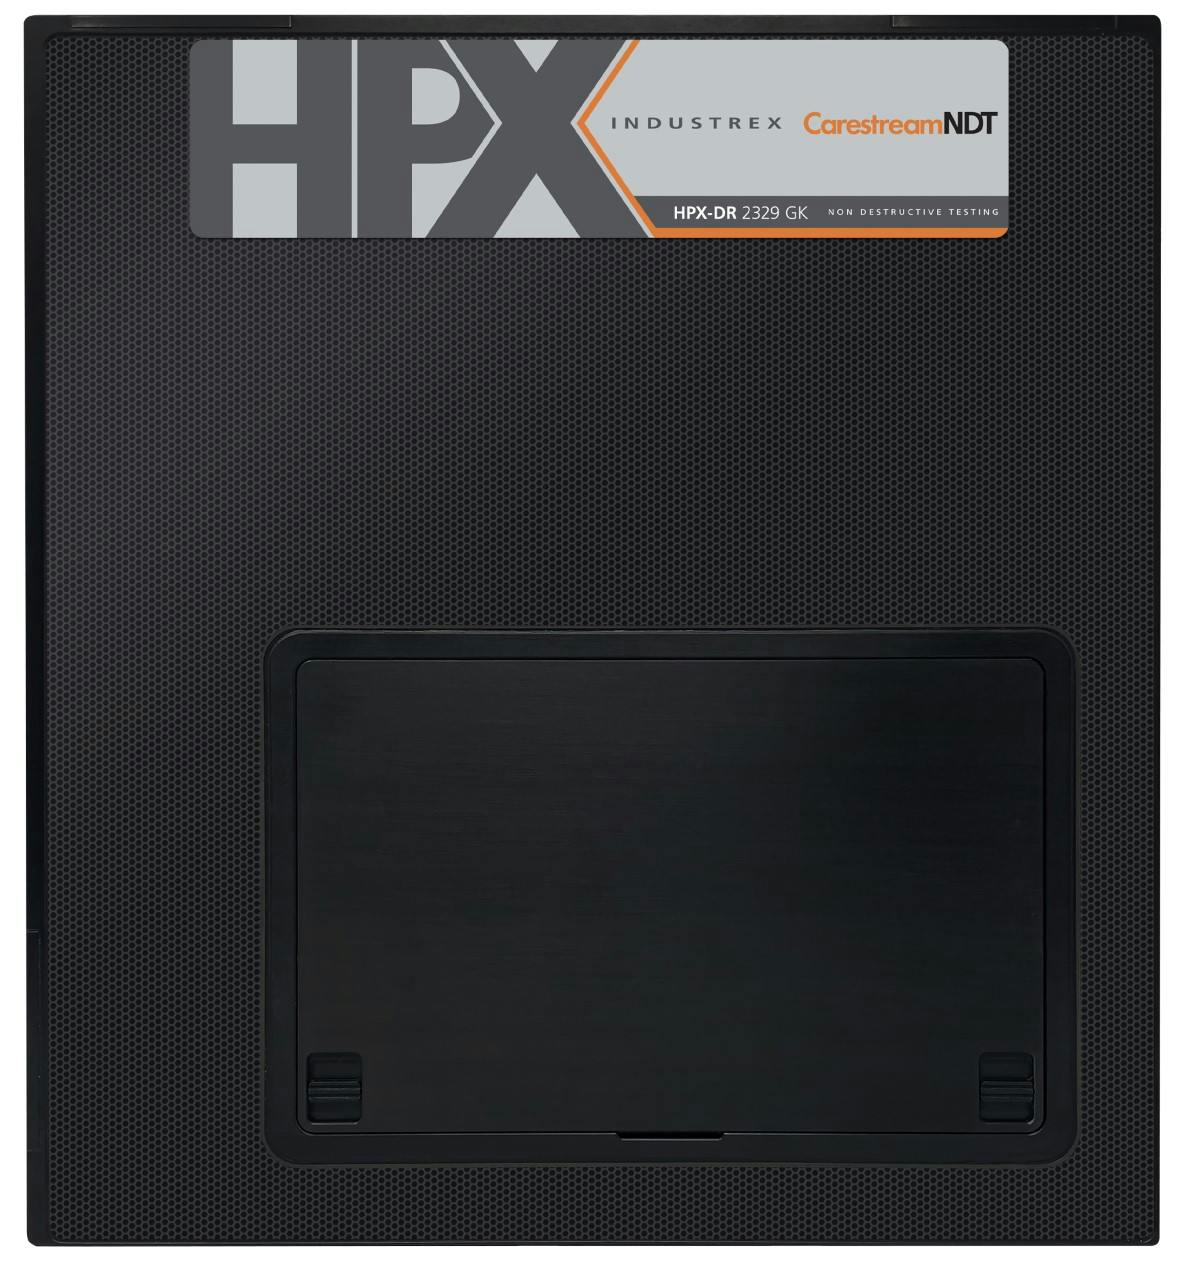 The HPX-DR 2329 GK is a cutting-edge detector that enables superb resolution and defect detection.